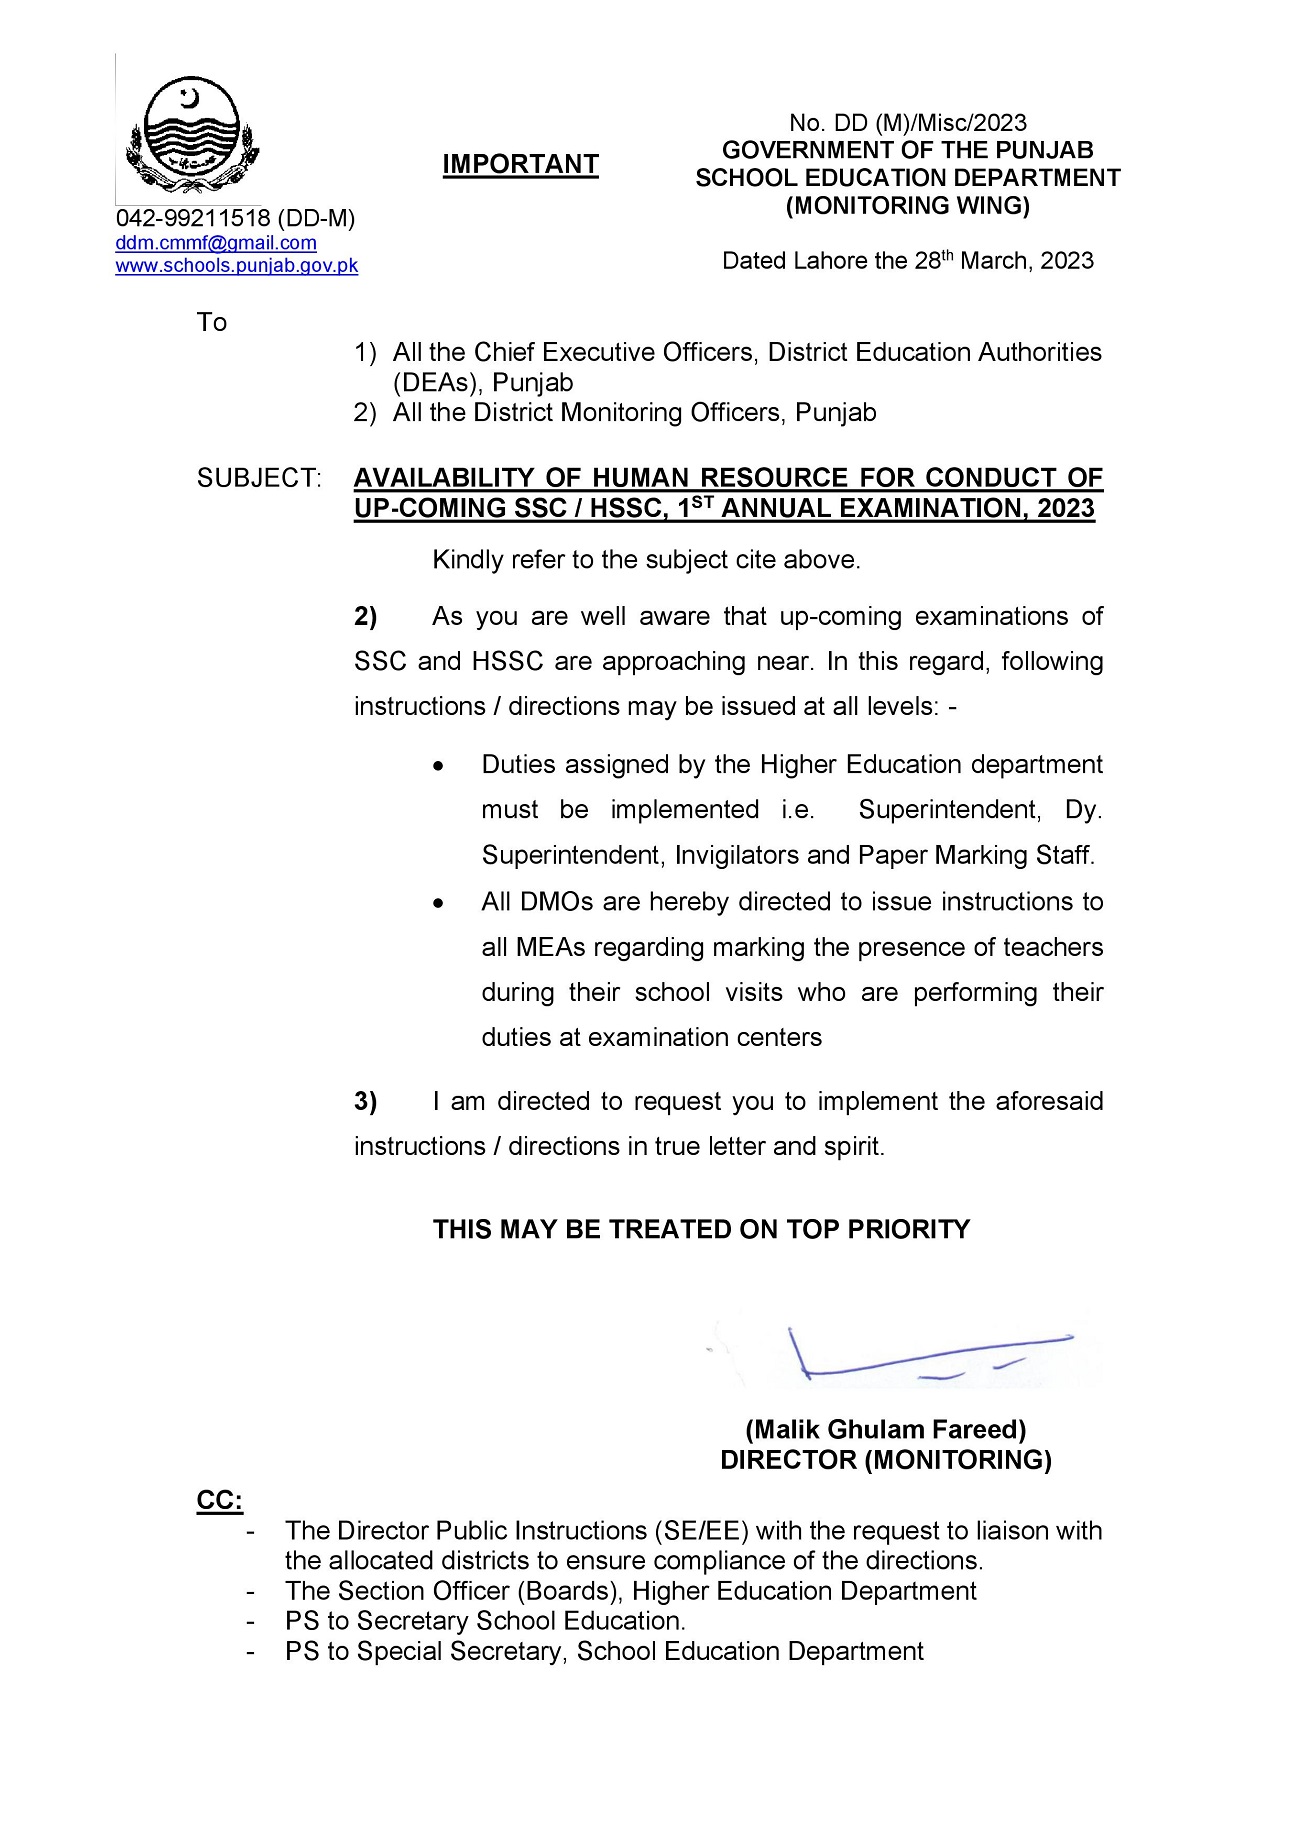 AVAILABILITY OF HUMAN RESOURCE FOR CONDUCT OF UP-COMING EXAM 2023